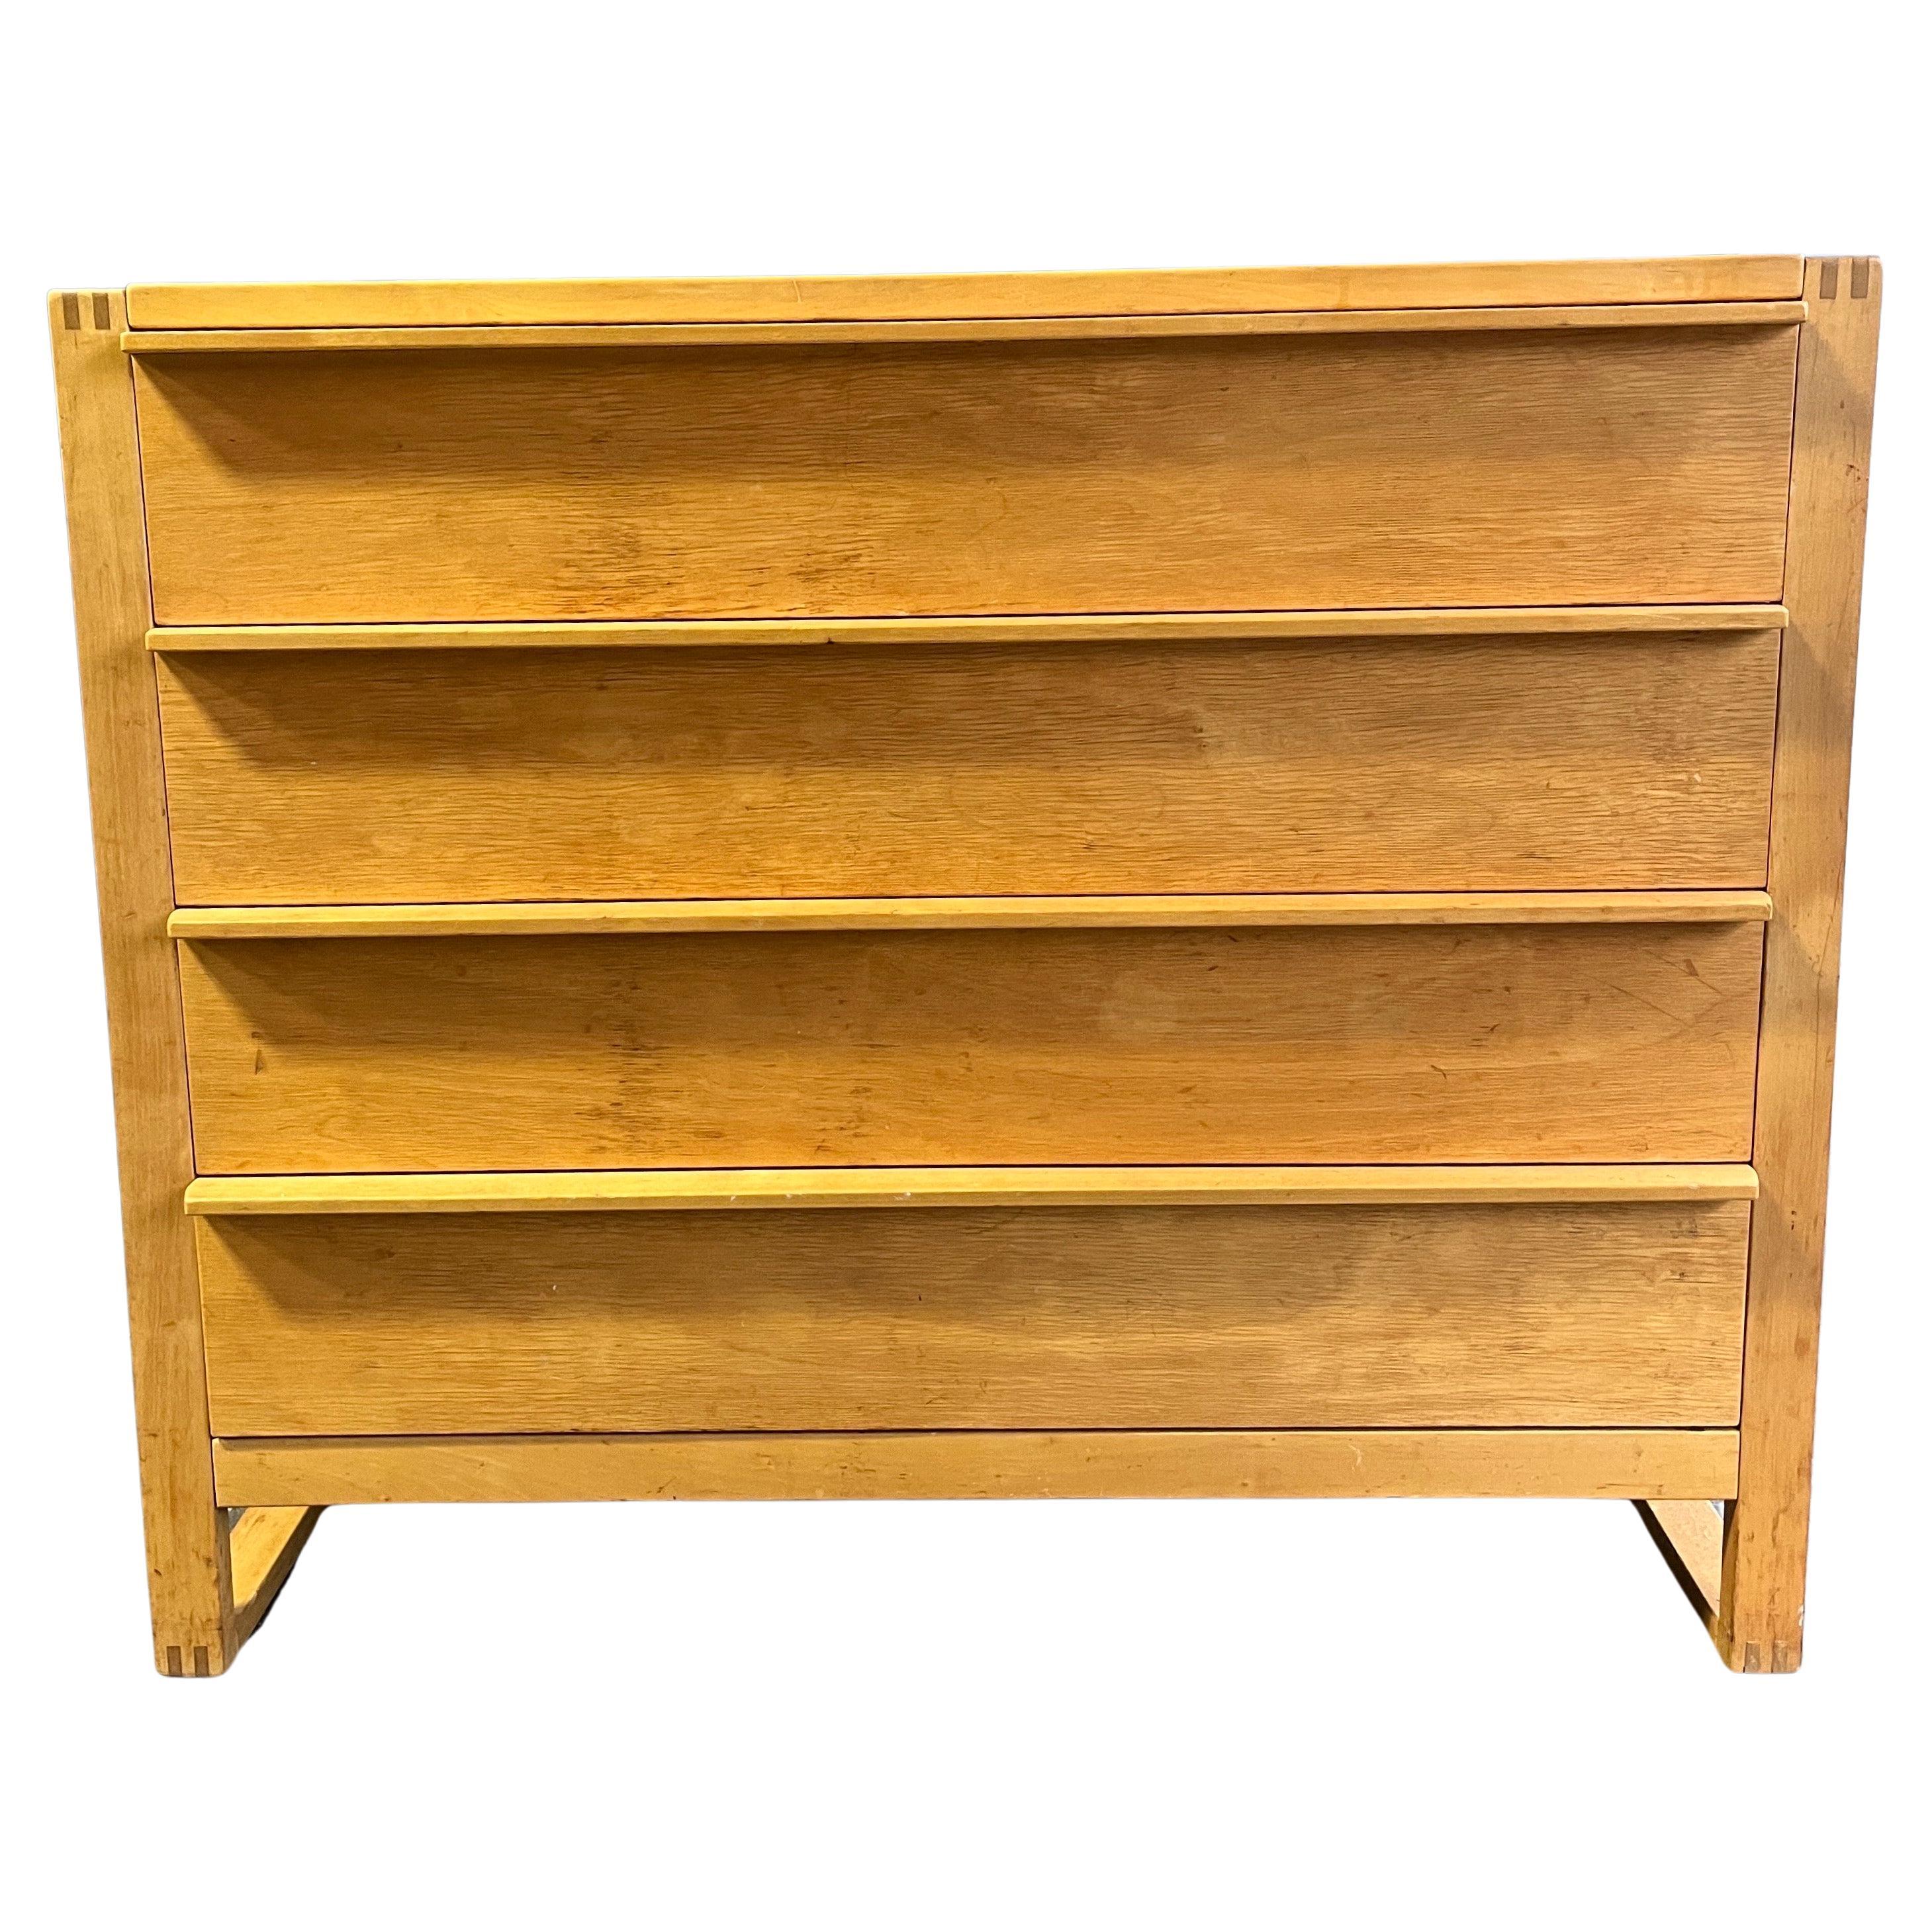 Mid-century chest of drawers featuring four shelves of equal proportions on sled base. Beautiful finger joints and brass screw details with original patina. Very solid handsome piece that would pair well with Mccobb, Eames, or Aalto designs.
